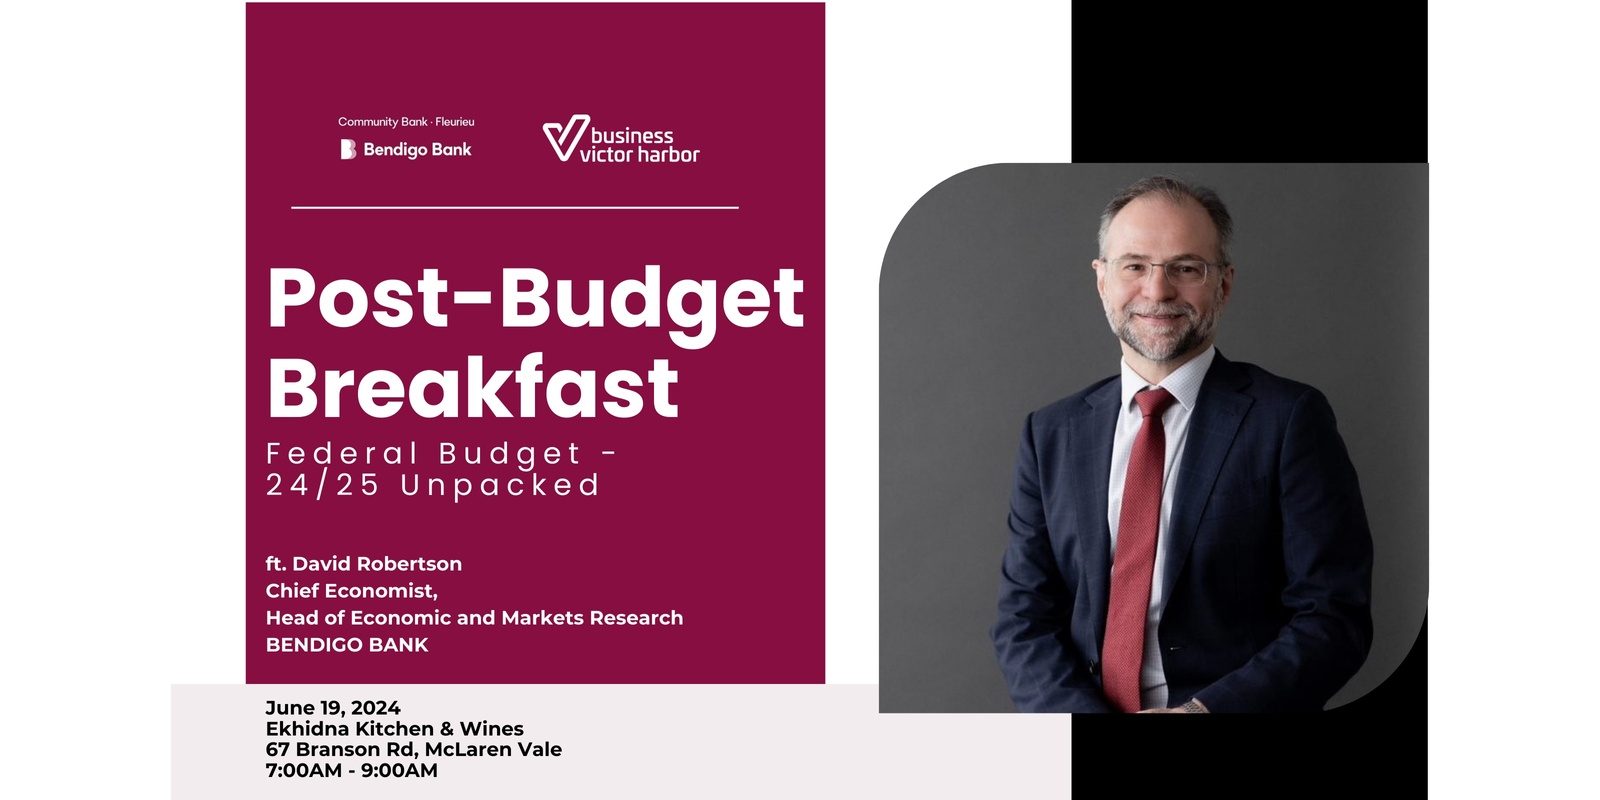 Banner image for Community Bank Fleurieu x BVH - Federal Budget 24/25 Unpacked Breakfast